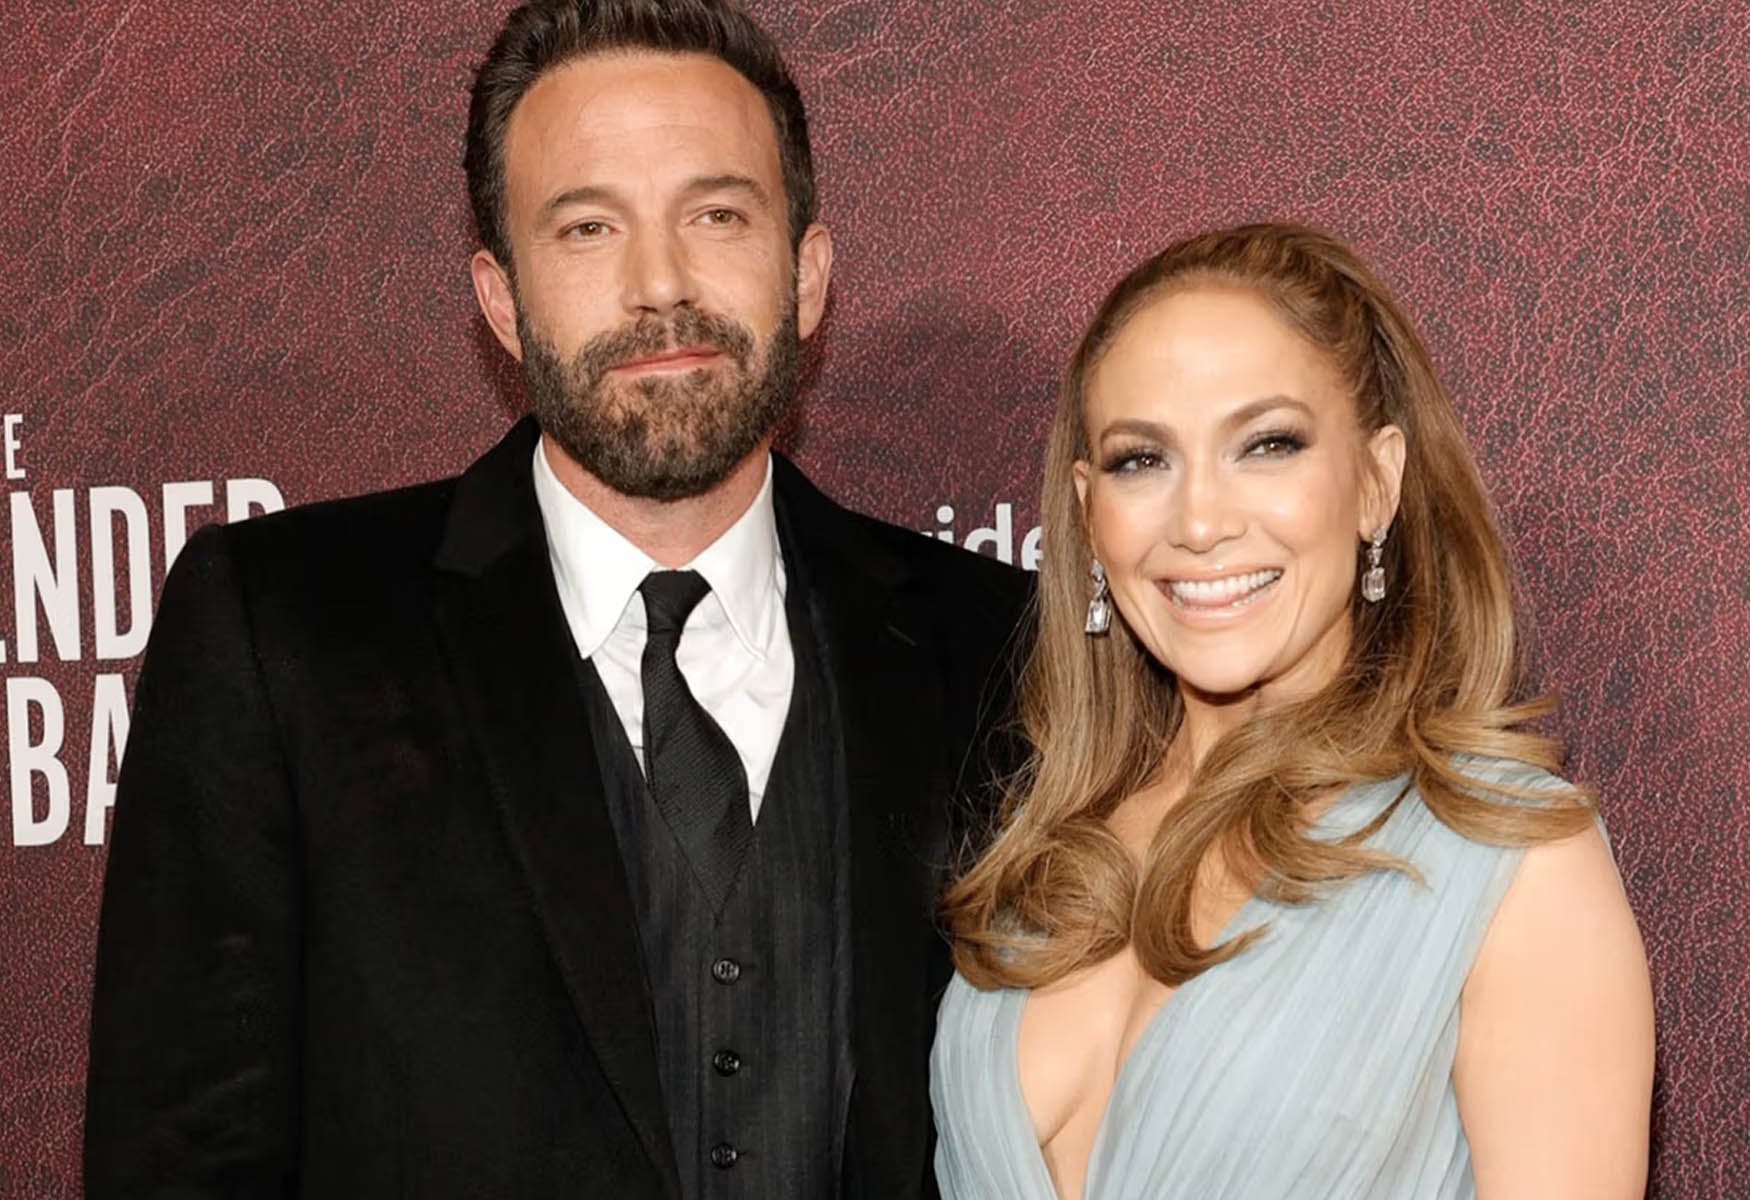 jennifer-lopez-and-ben-affleck-open-up-about-media-driven-ptsd-from-past-relationship